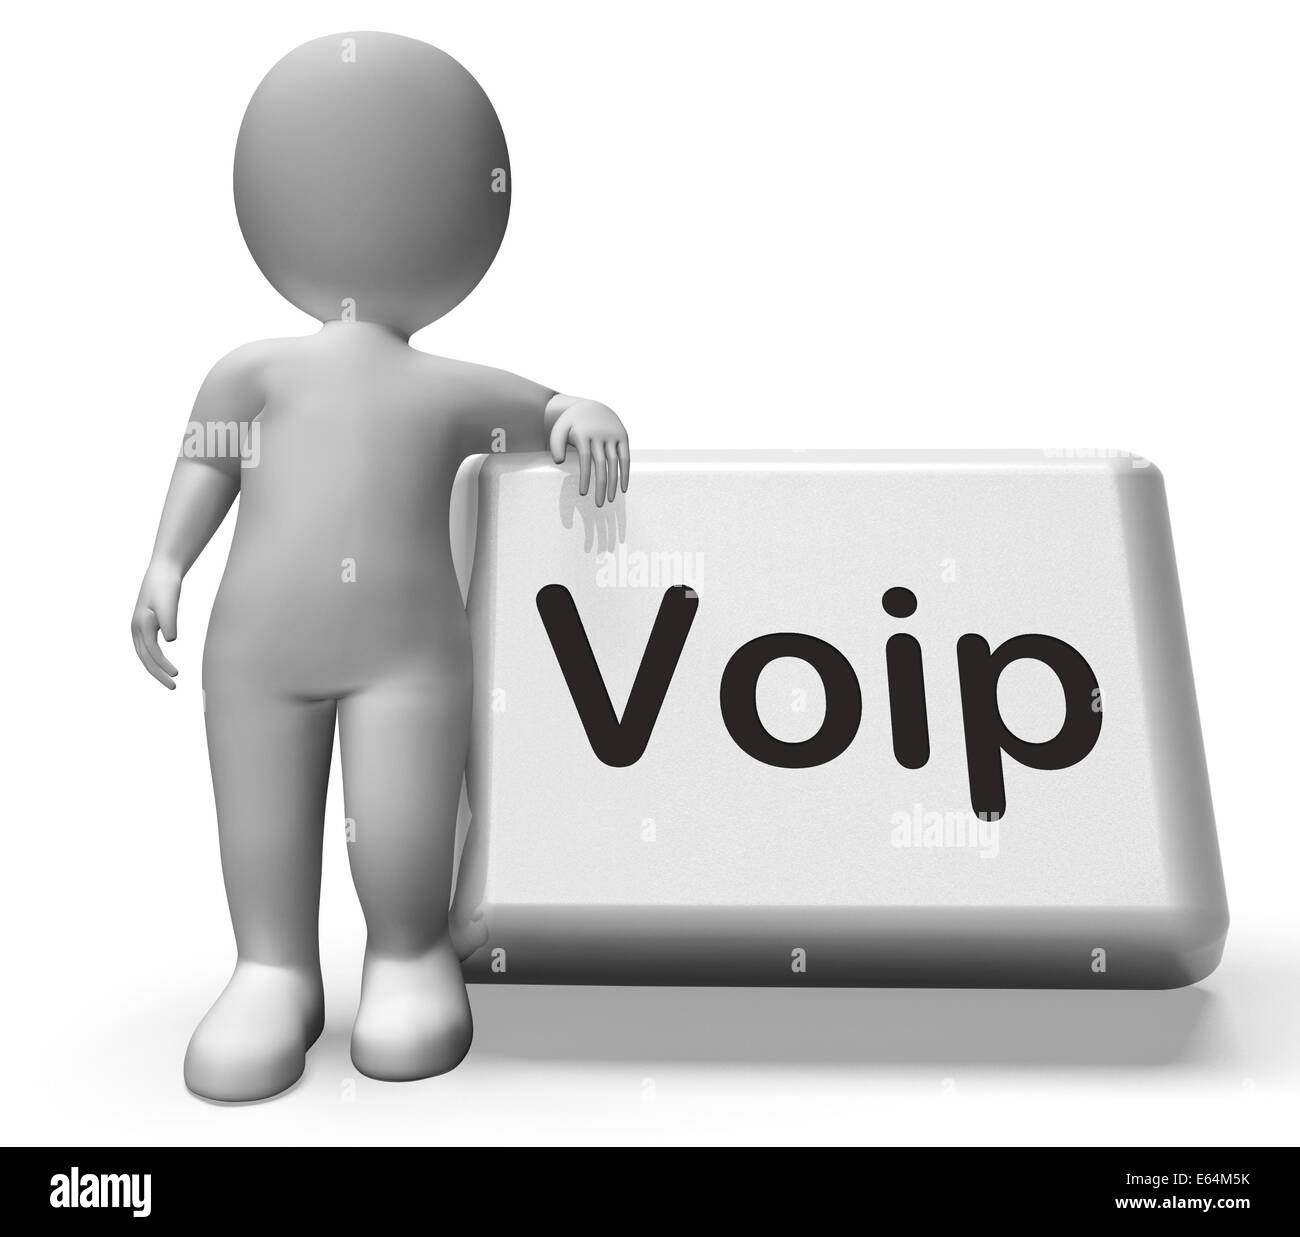 Voice Over Internet Protocol (VoIP) - RF Cafe